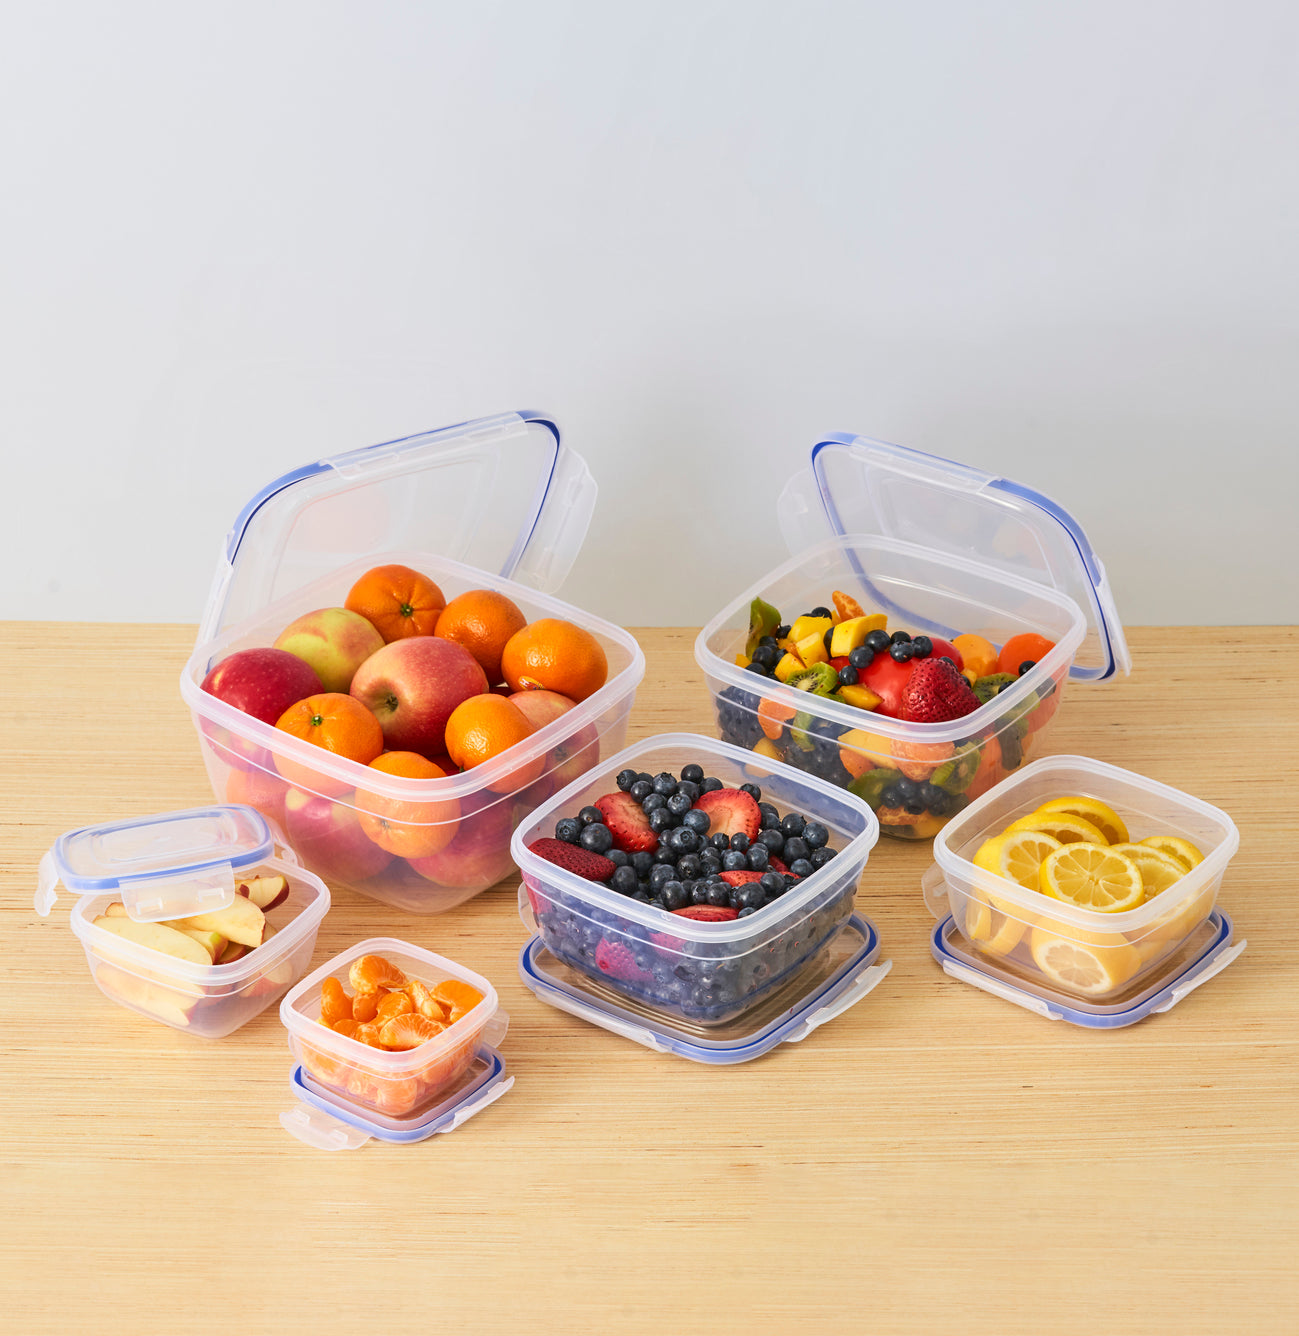 Superio Food Storage Containers, Airtight Leak-Proof Meal Prep Square Containers, Set of 3 Multiple sizes.